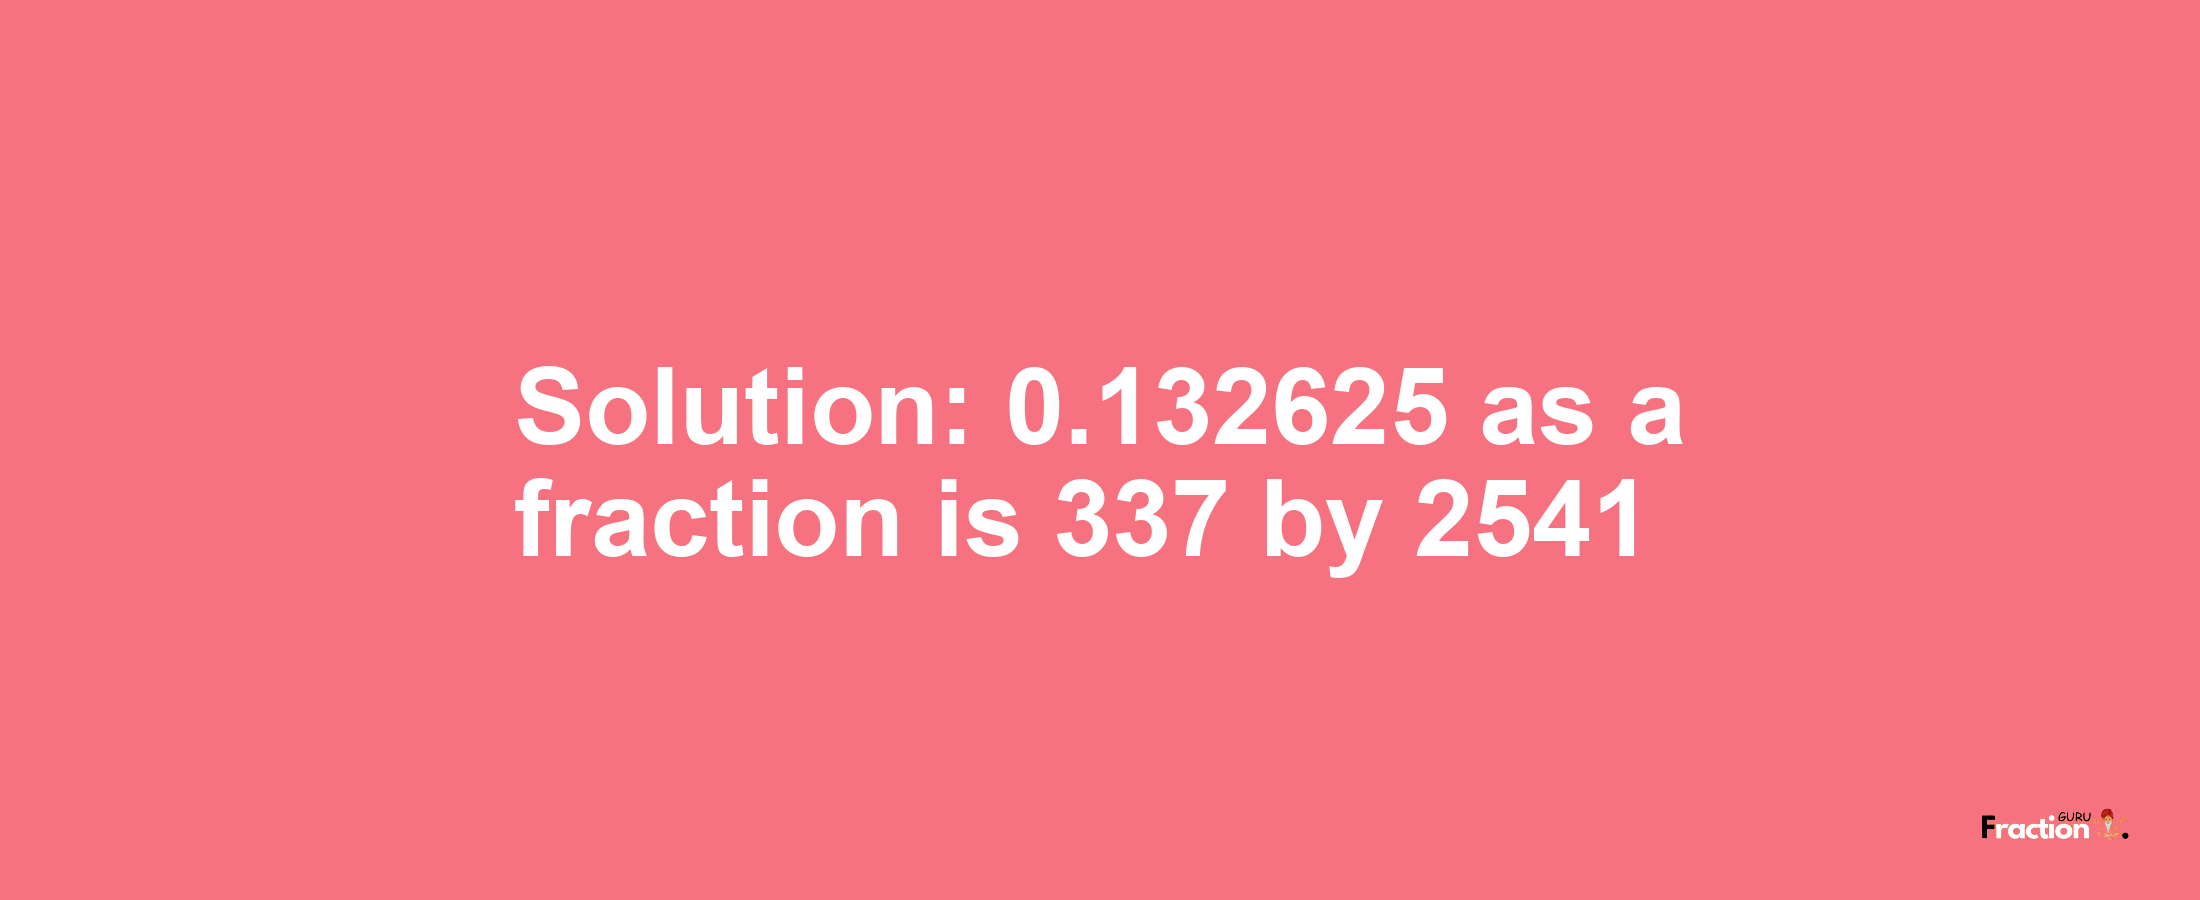 Solution:0.132625 as a fraction is 337/2541